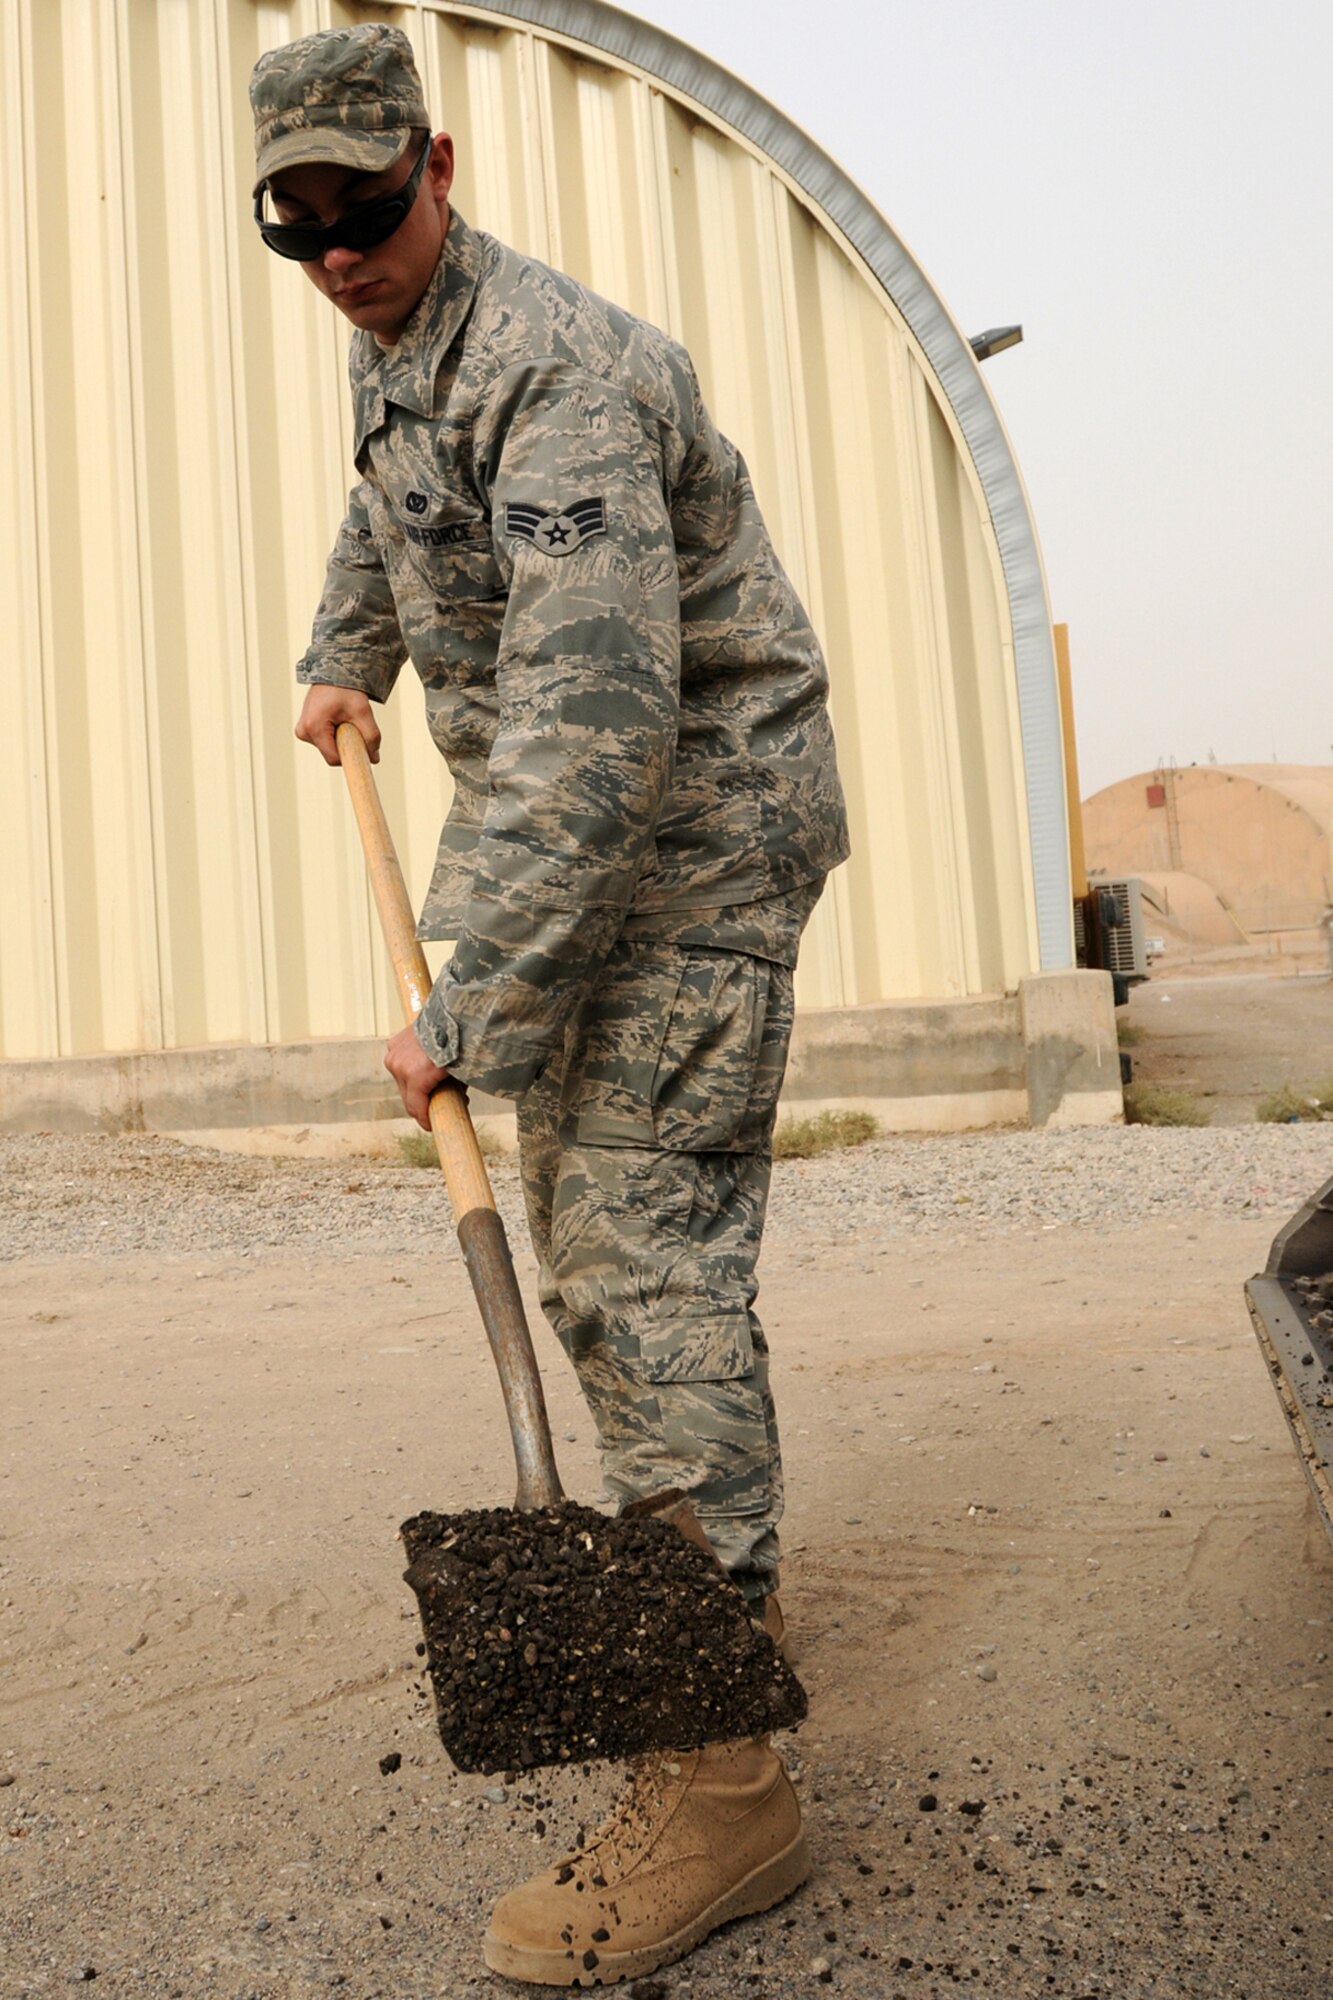 KIRKUK AB, Iraq - Senior Airman Benjamin Jenkins, 506th Expeditionary Civil Engineer Squadron, heavy equipment operator, fills a pot hole here, Sept. 17. Airman Jenkins, a Tillamook, Ore., native, is a Reservist deployed here from the 446th Civil Engineer Squadron, McChord Air Force Base, Wash. More than 40 Reserve Airmen from the 446th CES at McChord deployed to Iraq at the end of August. (U.S. Air Force photo/Staff Sgt. Joshua Breckon)
